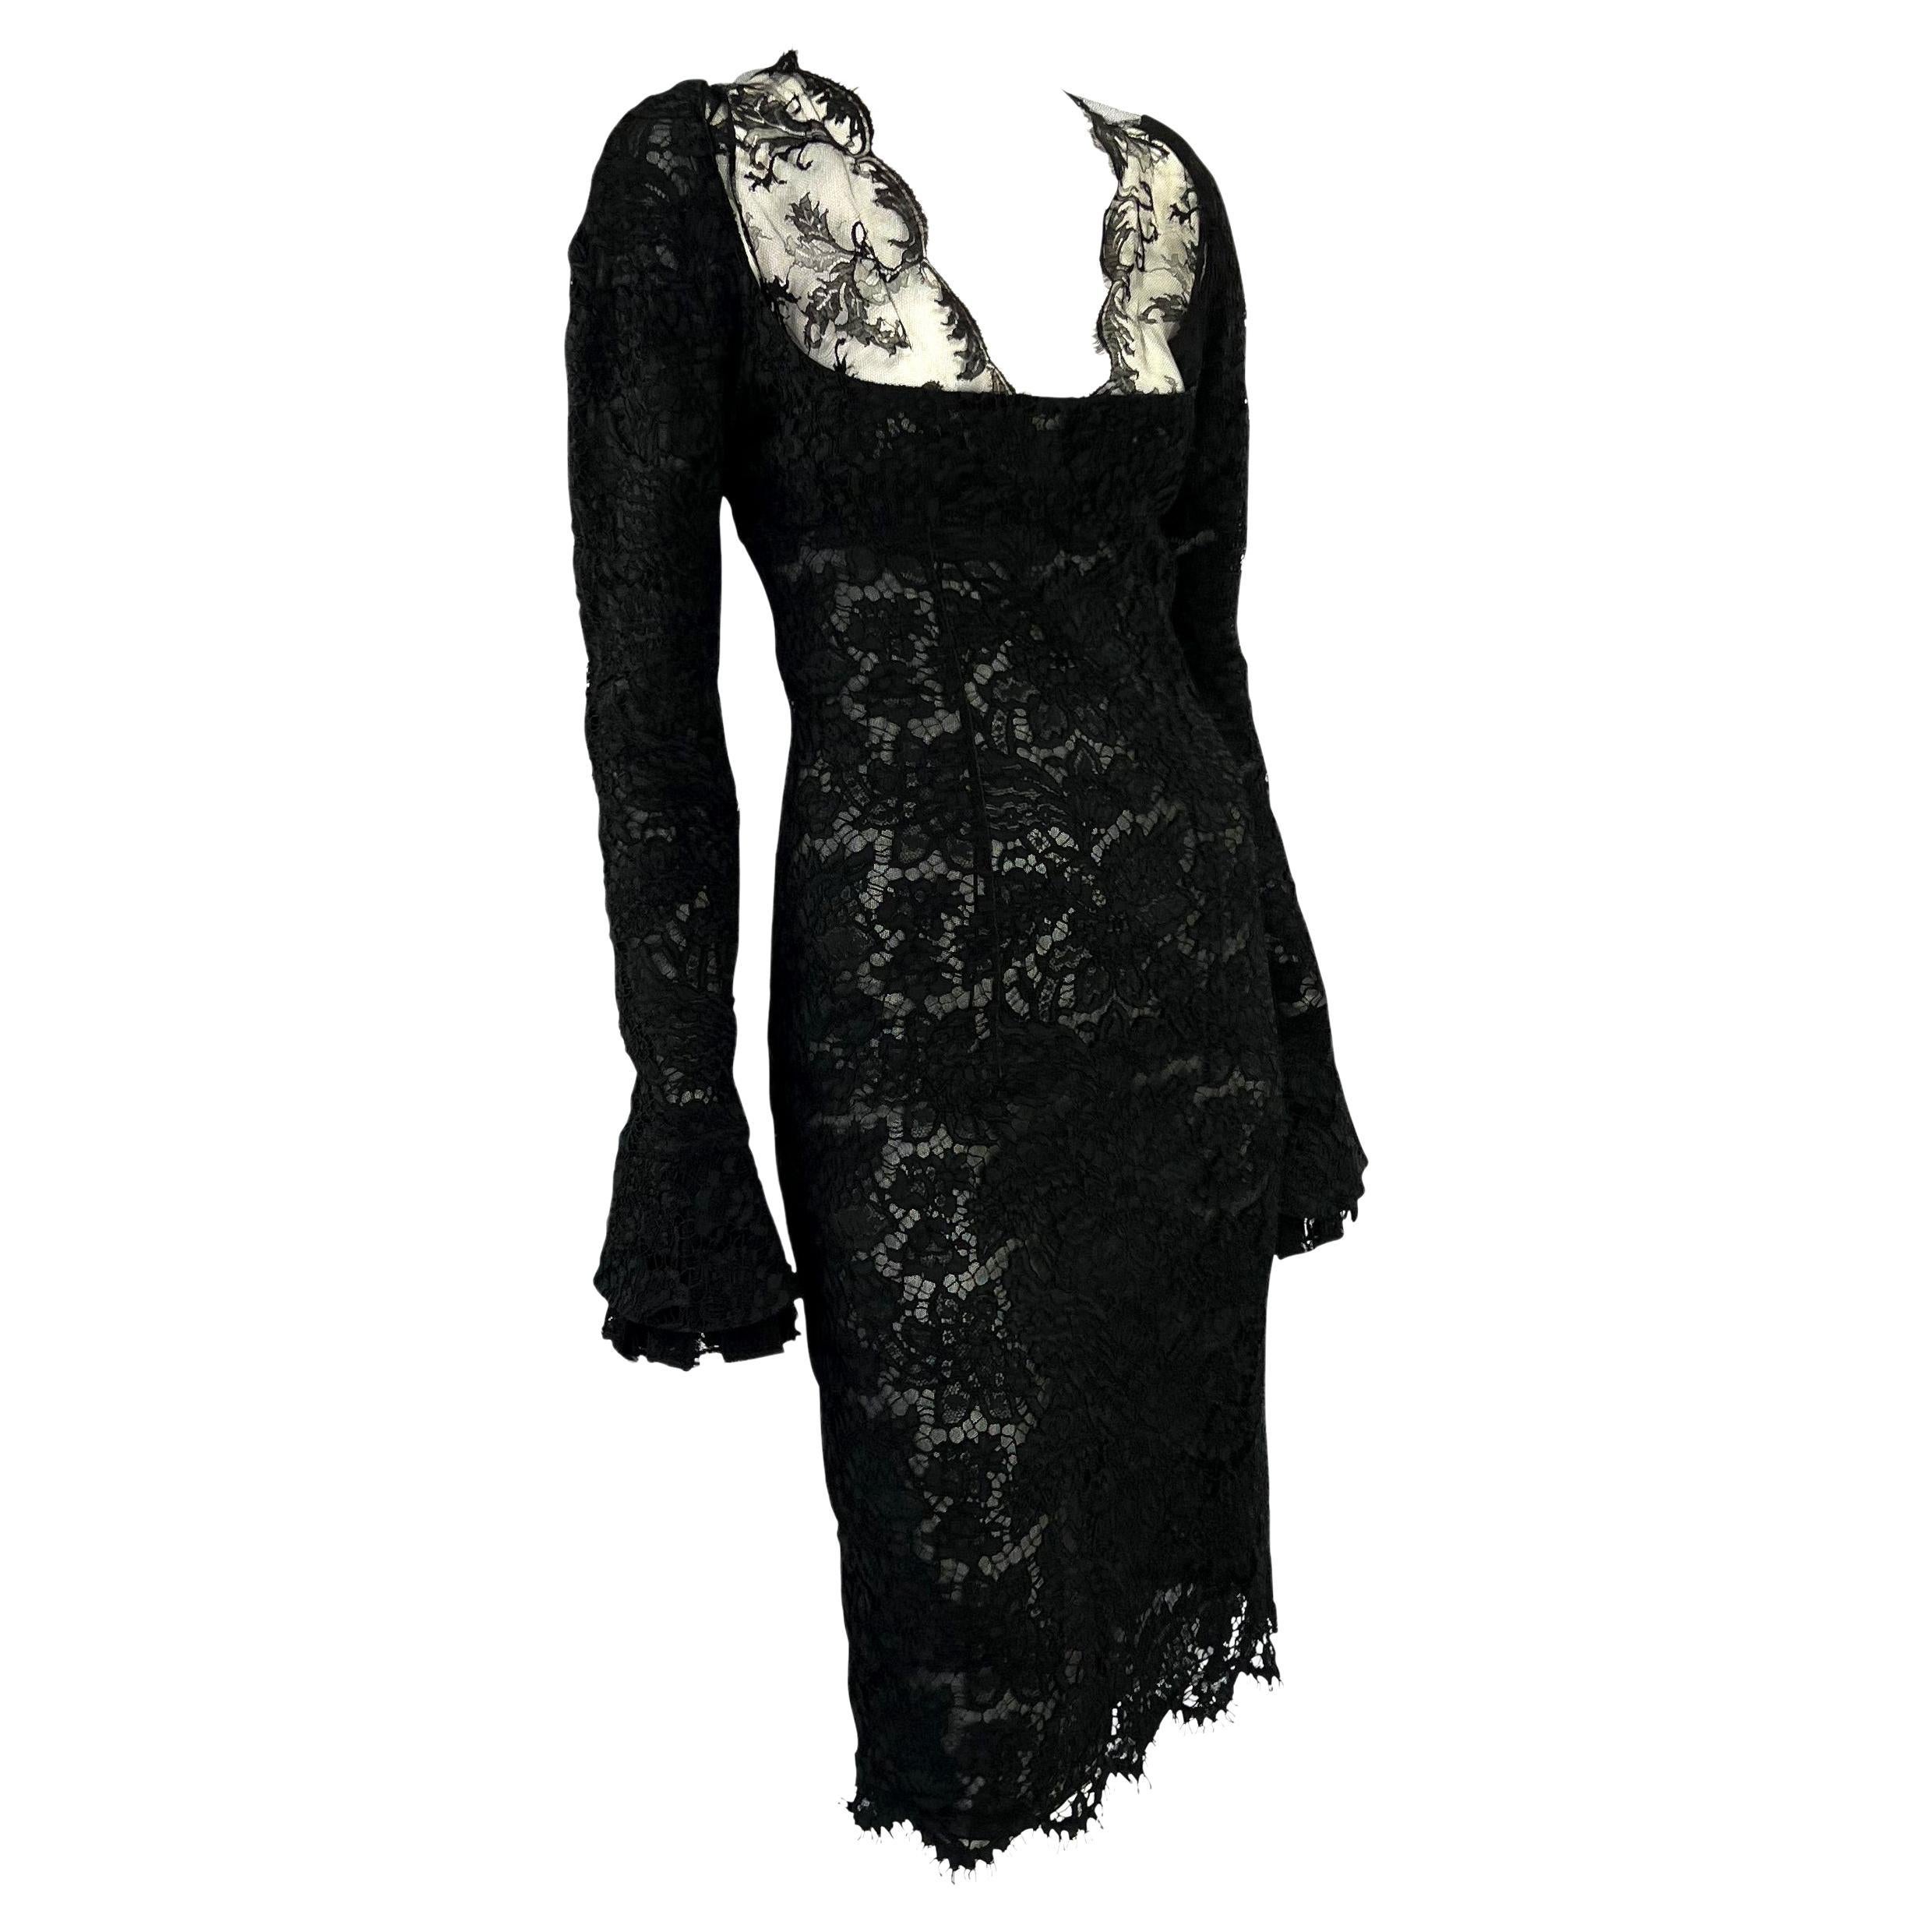 NWT F/W 2002 Yves Saint Laurent by Tom Ford Runway Sheer Lace Dress For Sale 2